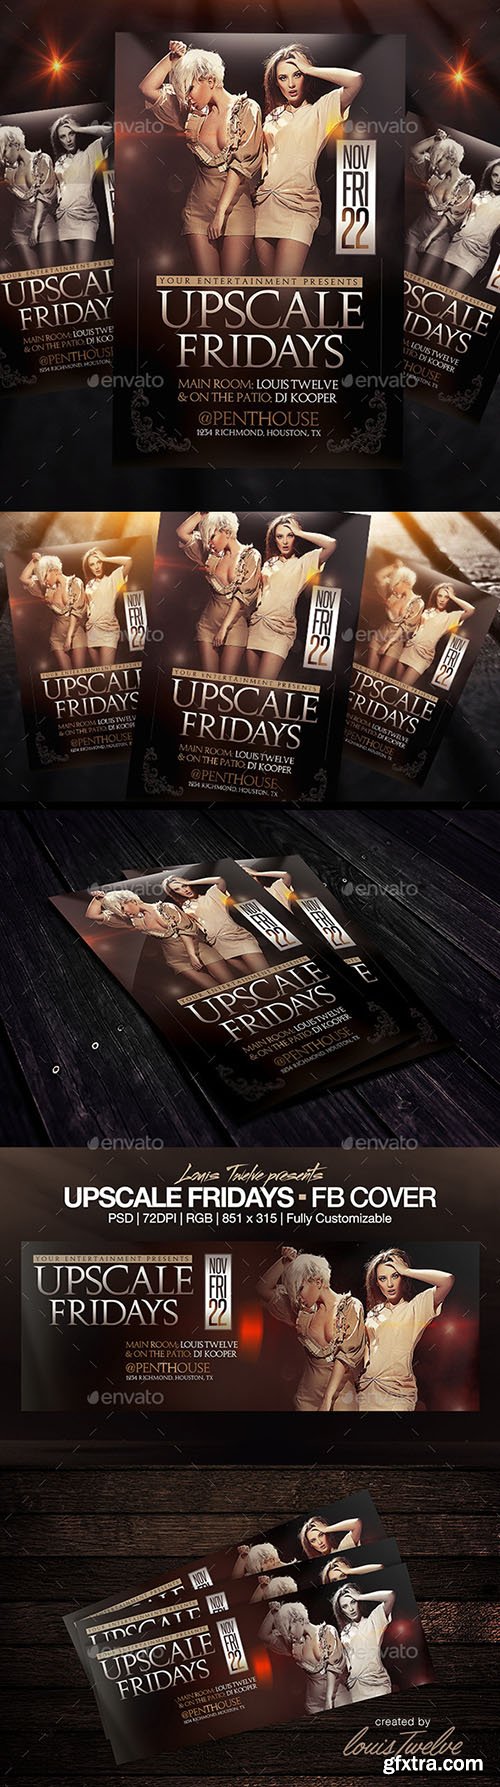 Graphicriver Upscale Fridays | Flyer + FB Cover 9110906